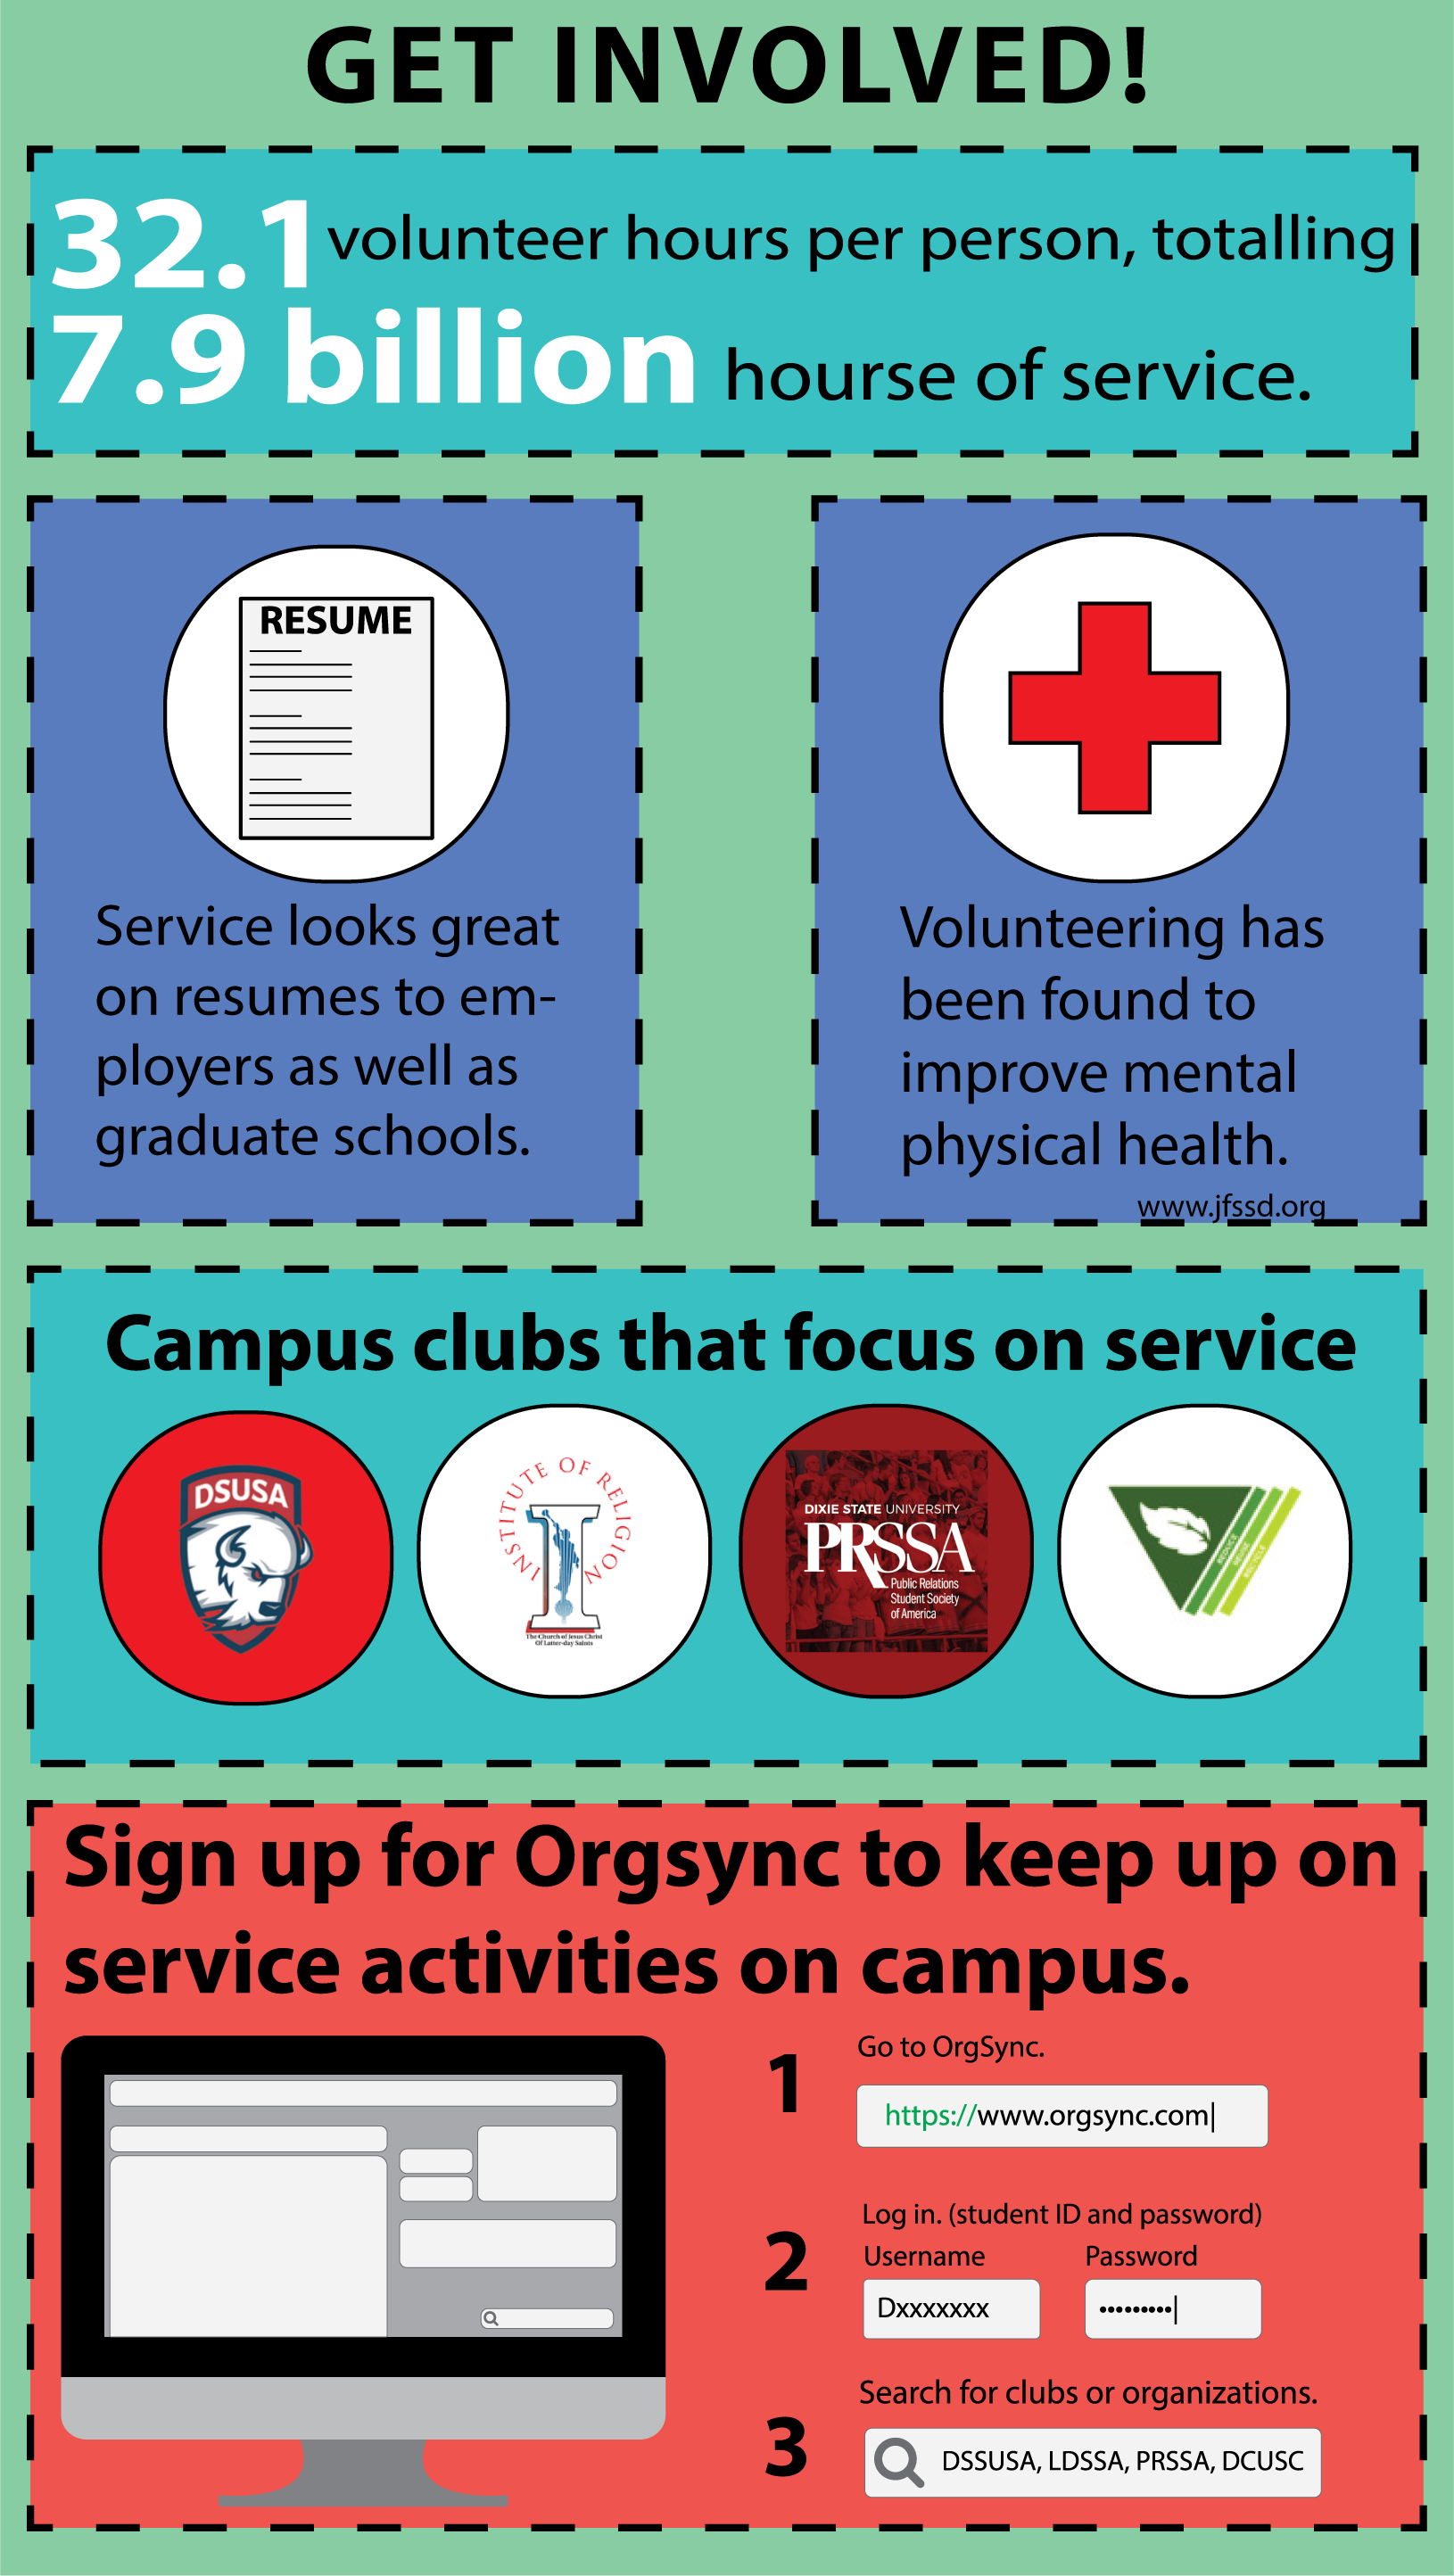 Opportunities to provide service at DSU